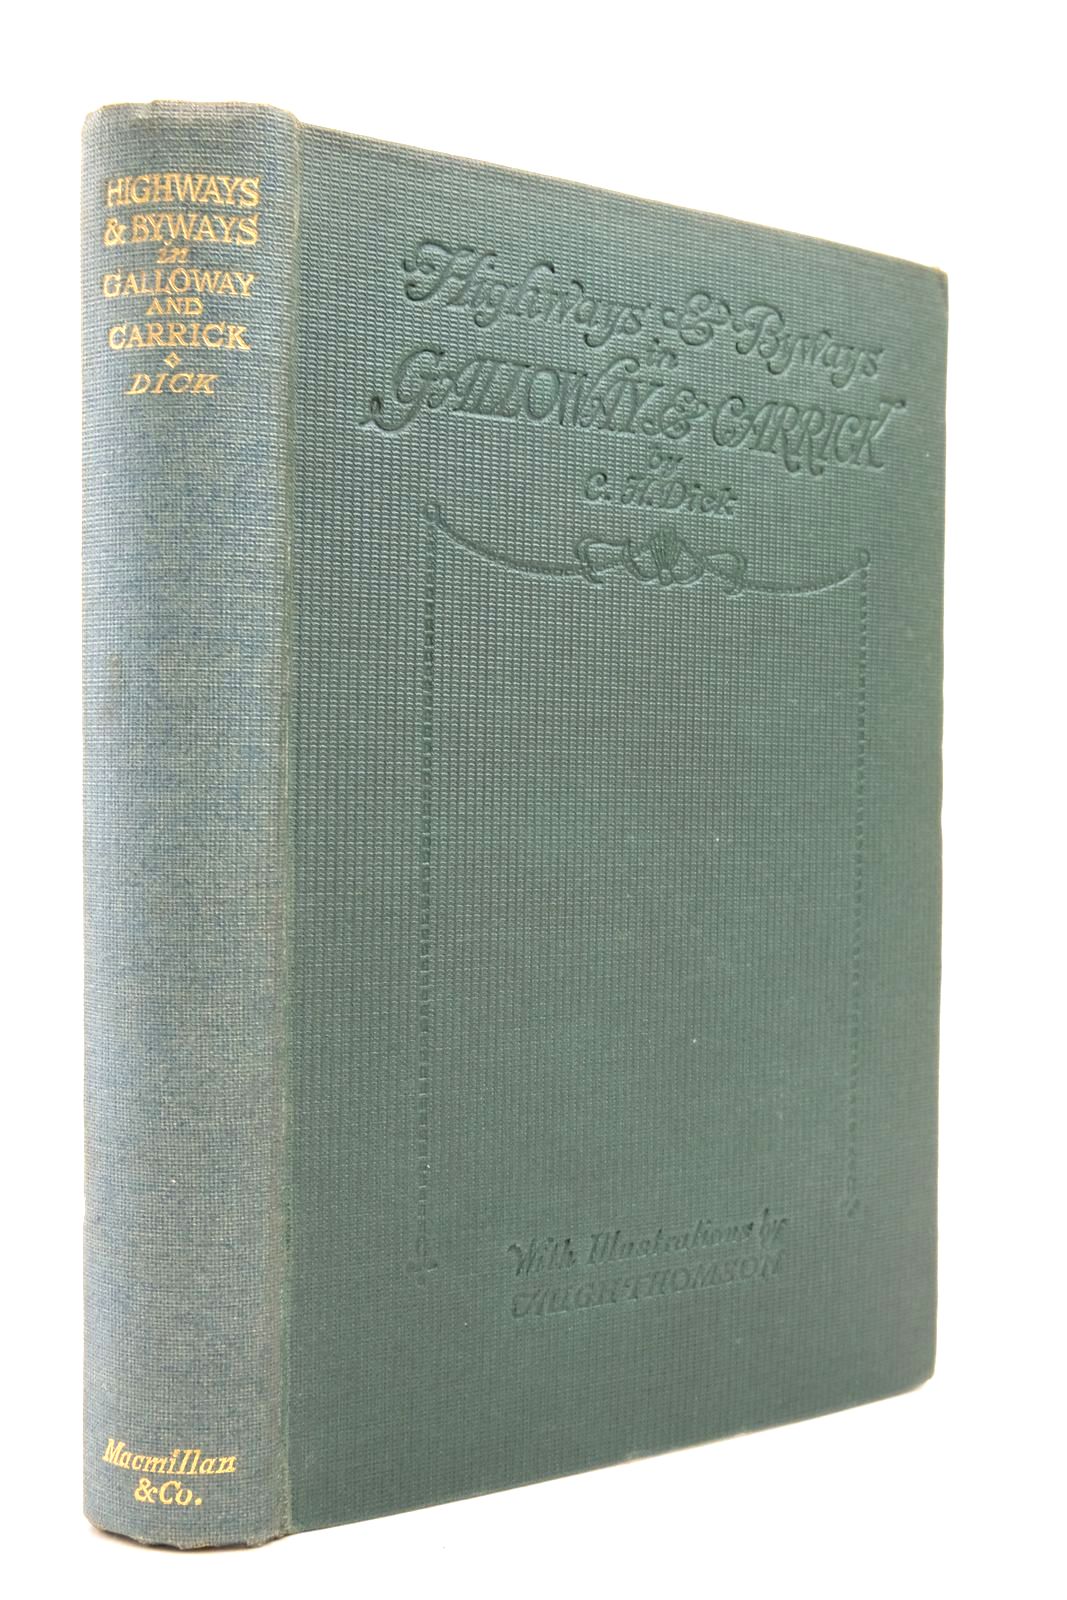 Photo of HIGHWAYS AND BYWAYS IN GALLOWAY AND CARRICK written by Dick, C.H. illustrated by Thomson, Hugh published by Macmillan & Co. Ltd. (STOCK CODE: 2137631)  for sale by Stella & Rose's Books